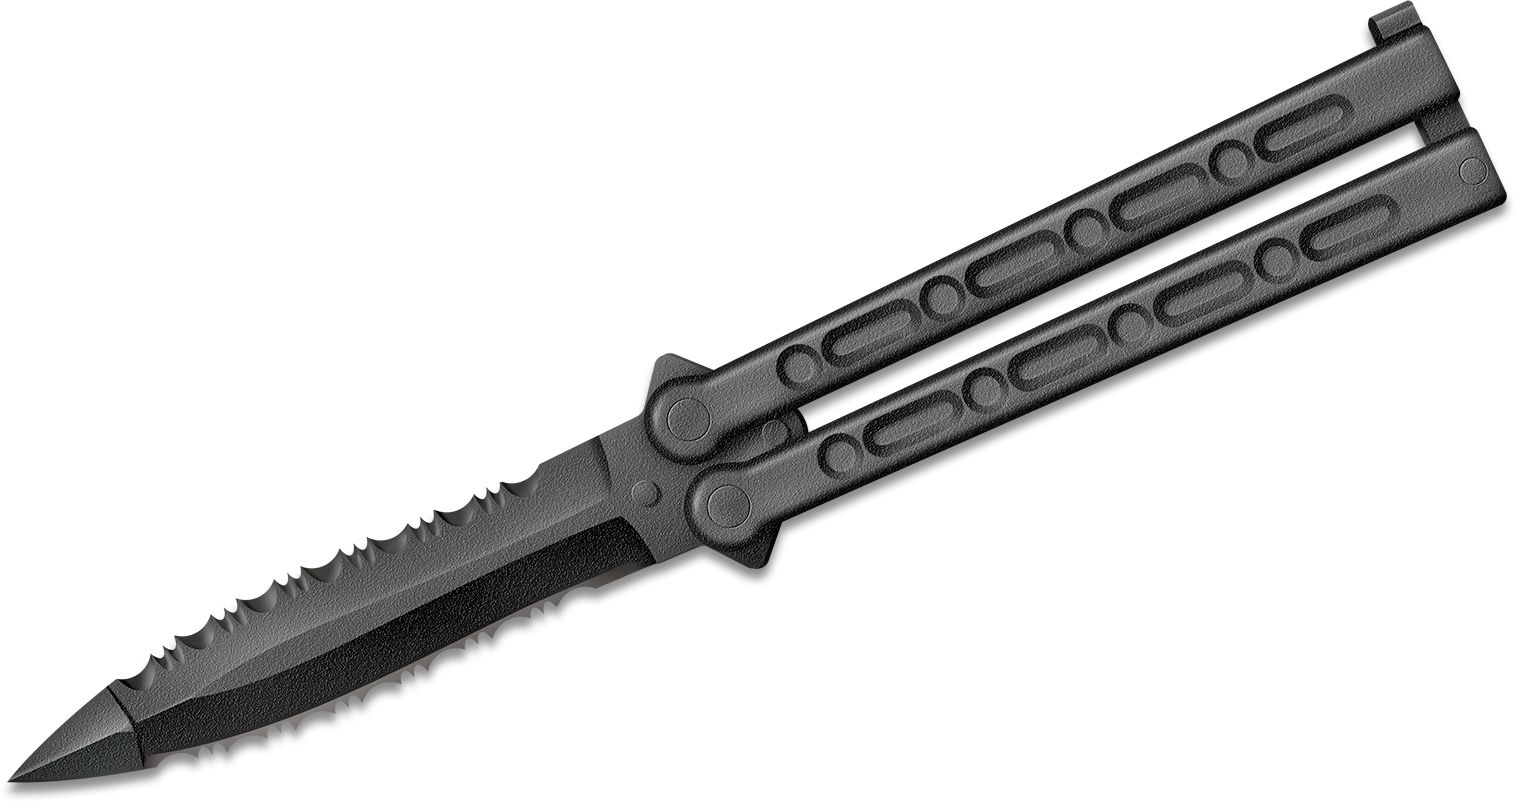  DOUBLE 2 C Butterfly Knife, Practice Balisong Knife